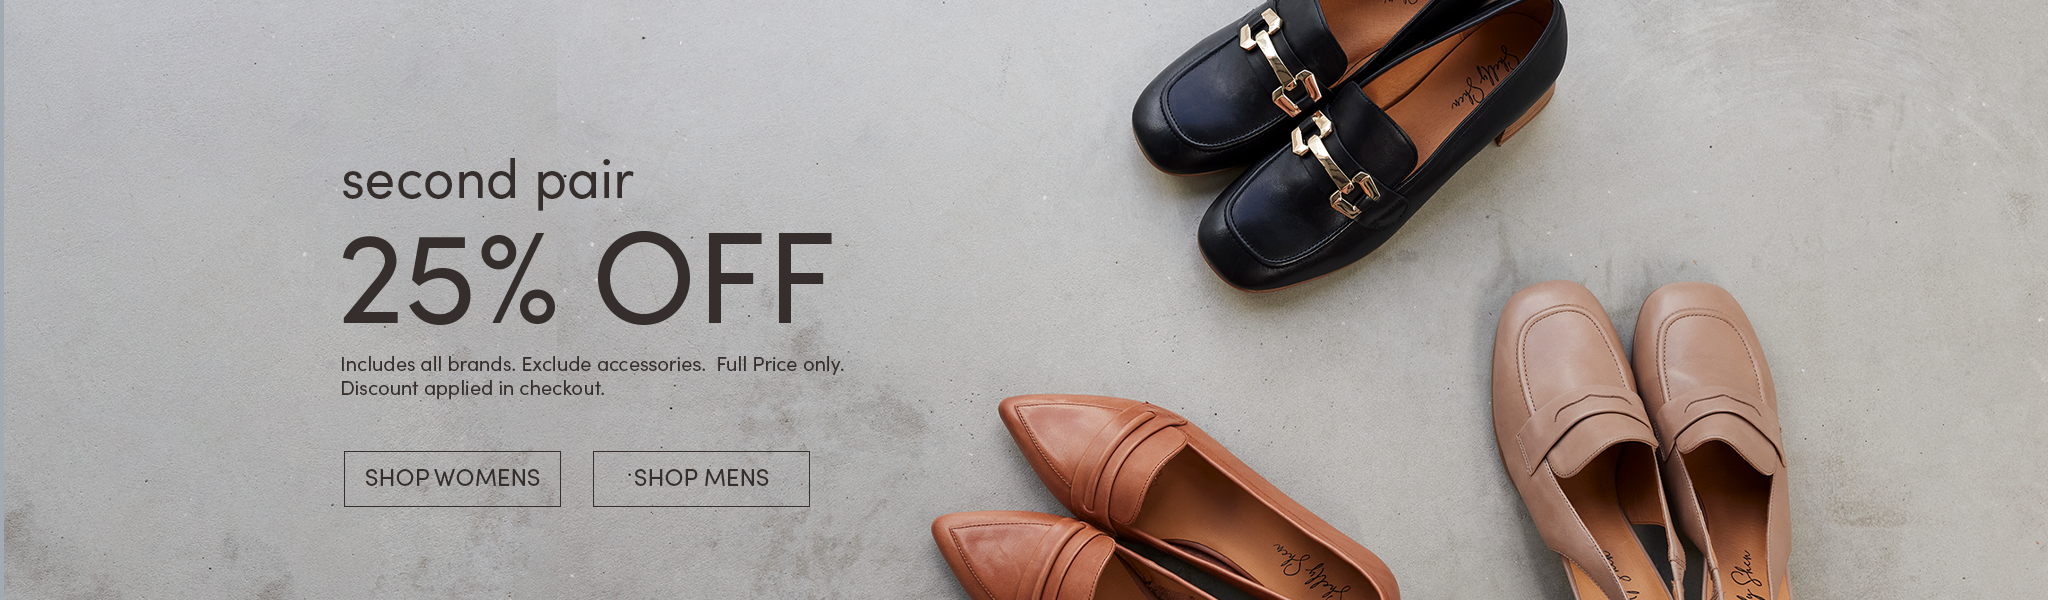 Half price sale in Shoe Connection